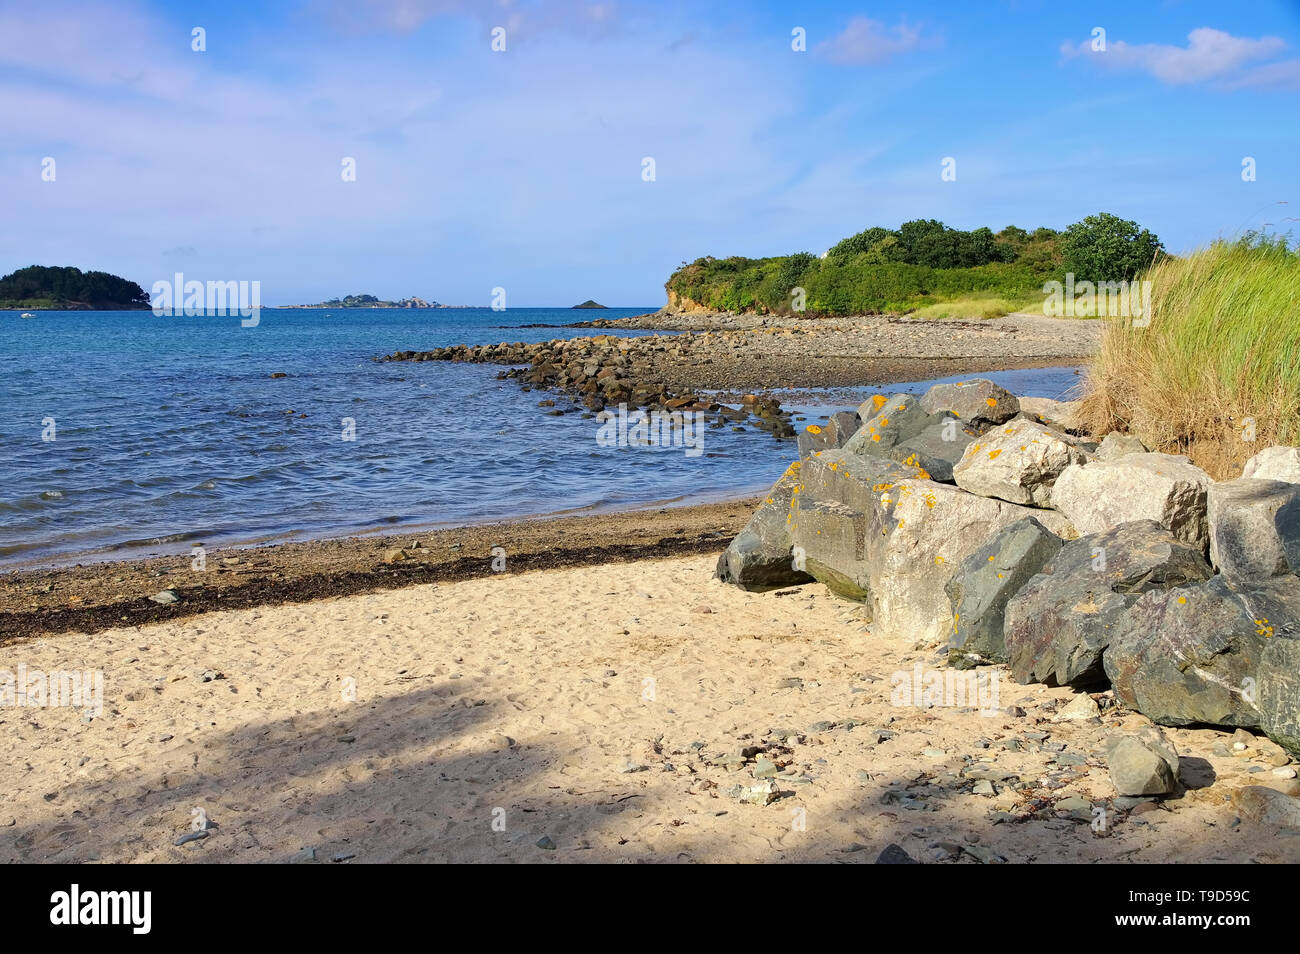 Paimpol beach in Brittany, France Stock Photo